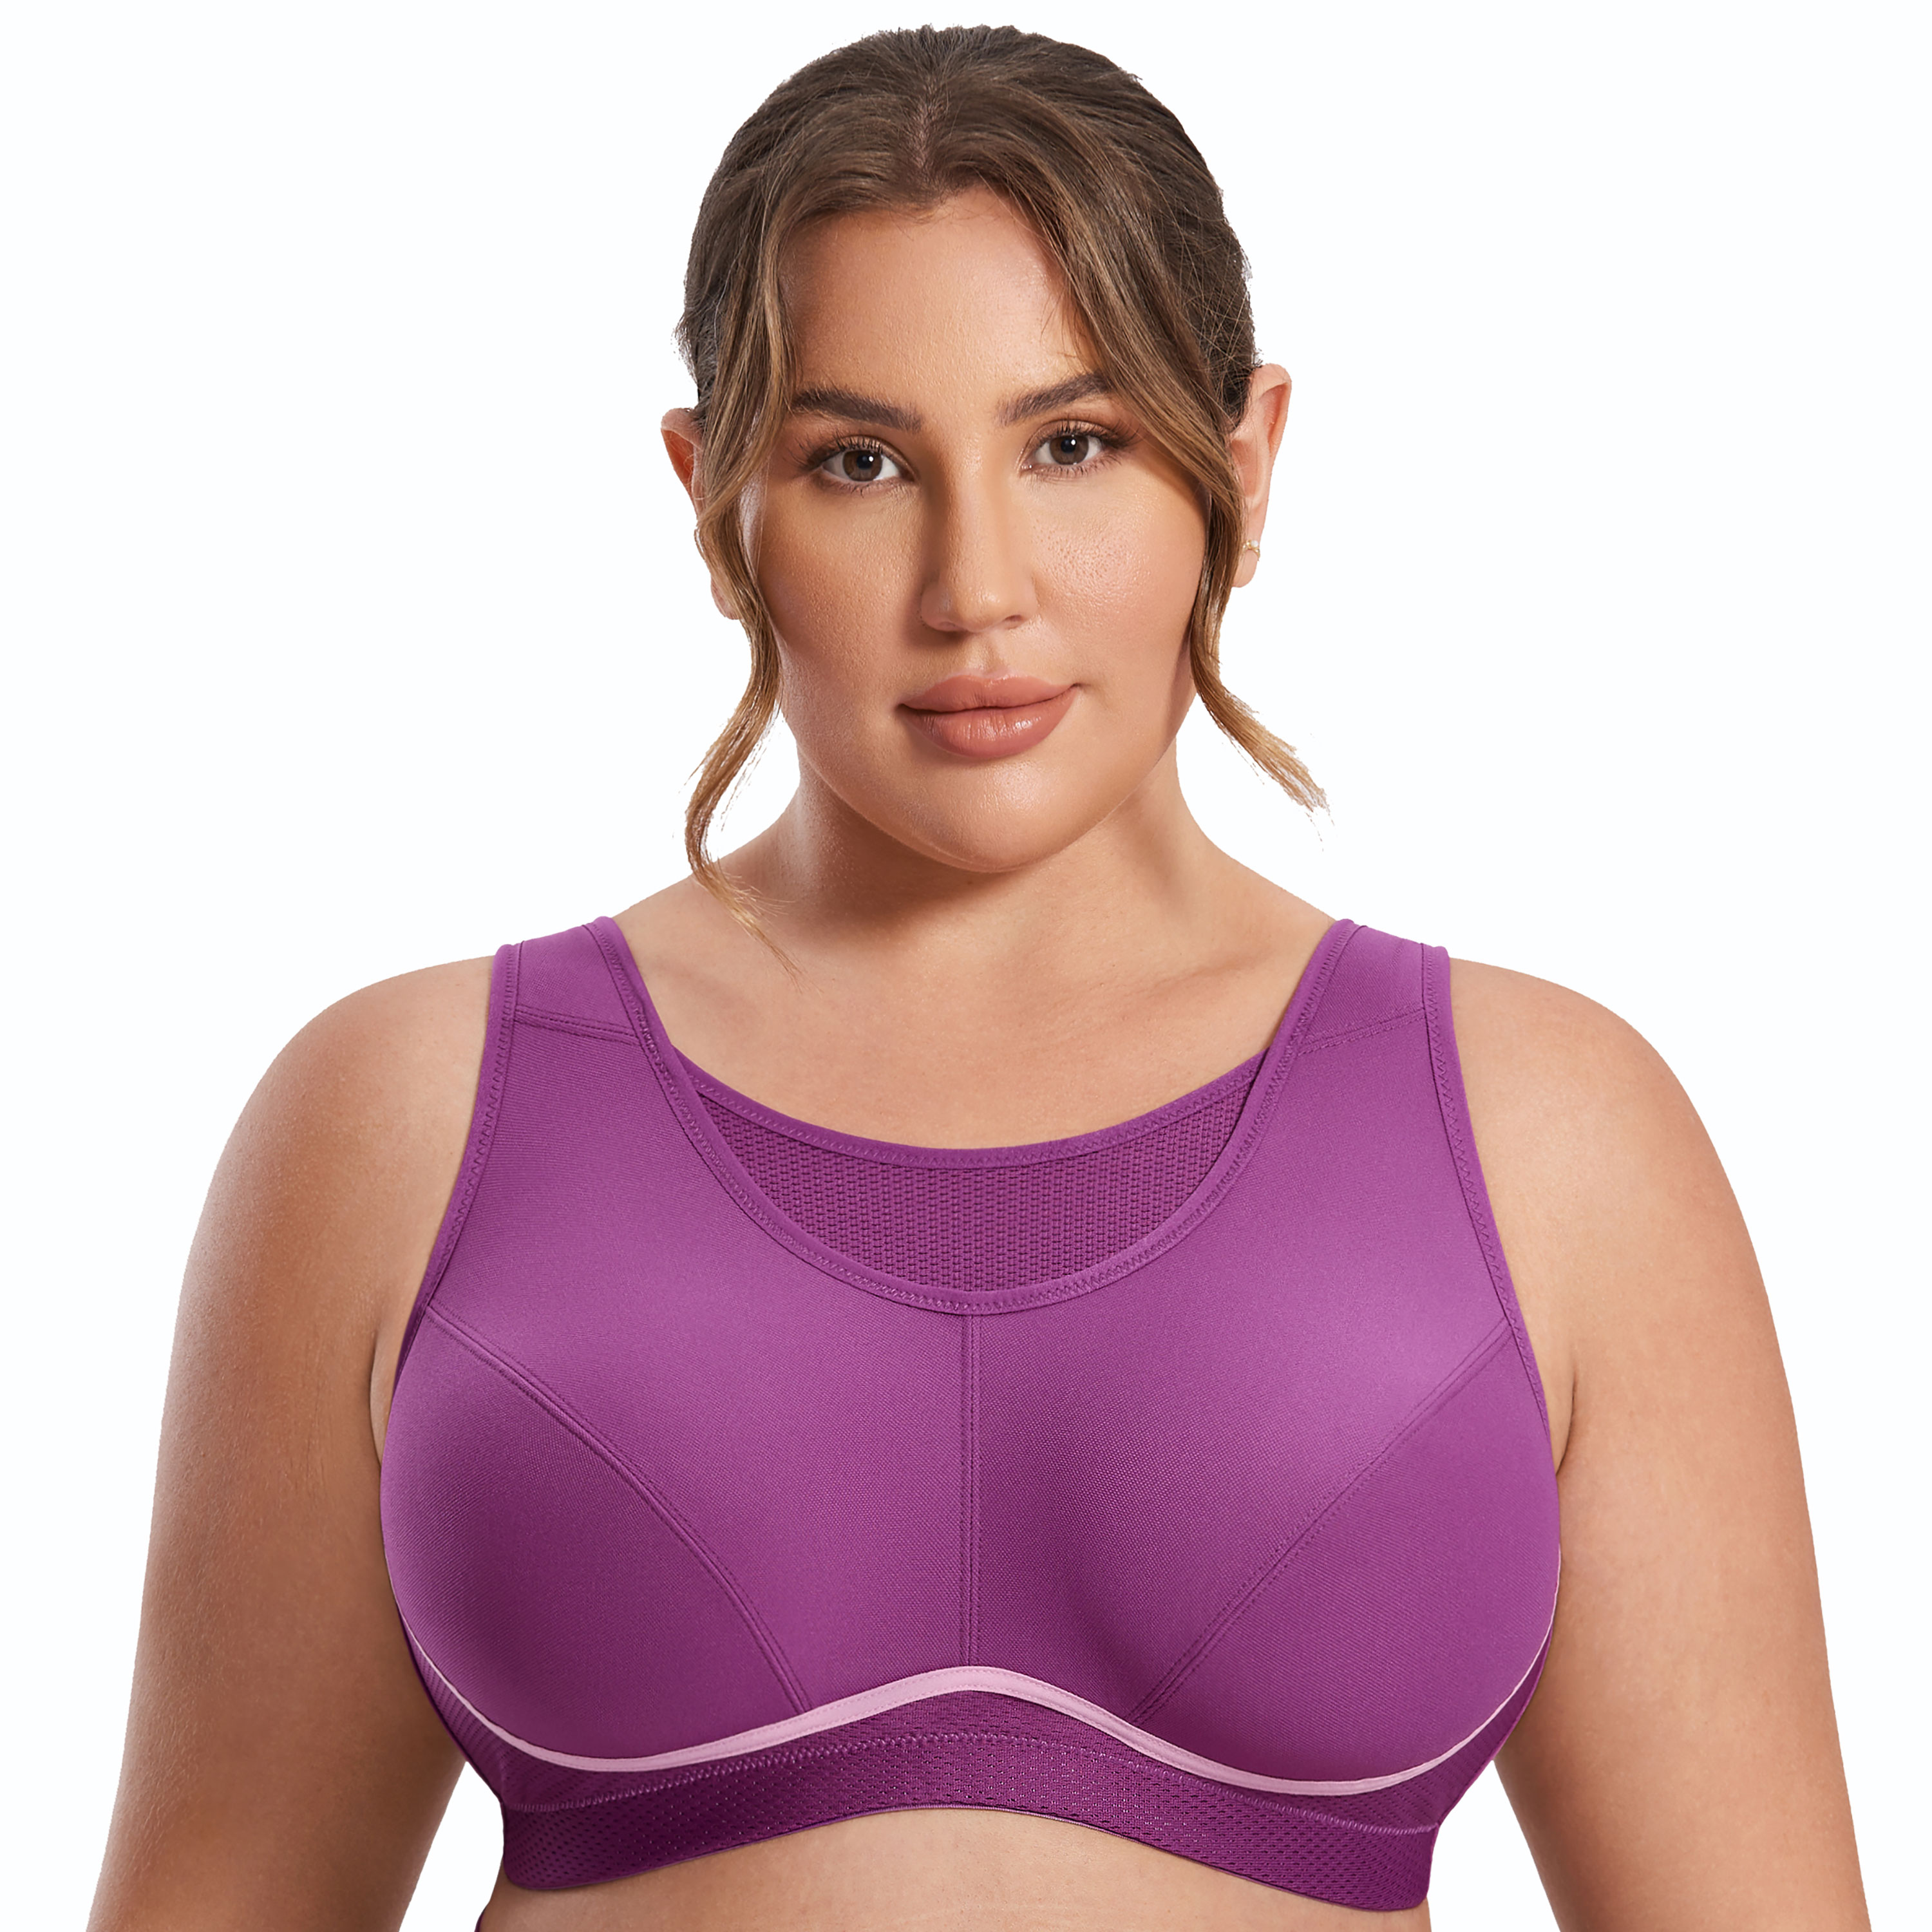 SYROKAN Sports Bra Women's Spandex Front Adjustable No Wire High Impact  Full Support Plus Size Wirefree Gym